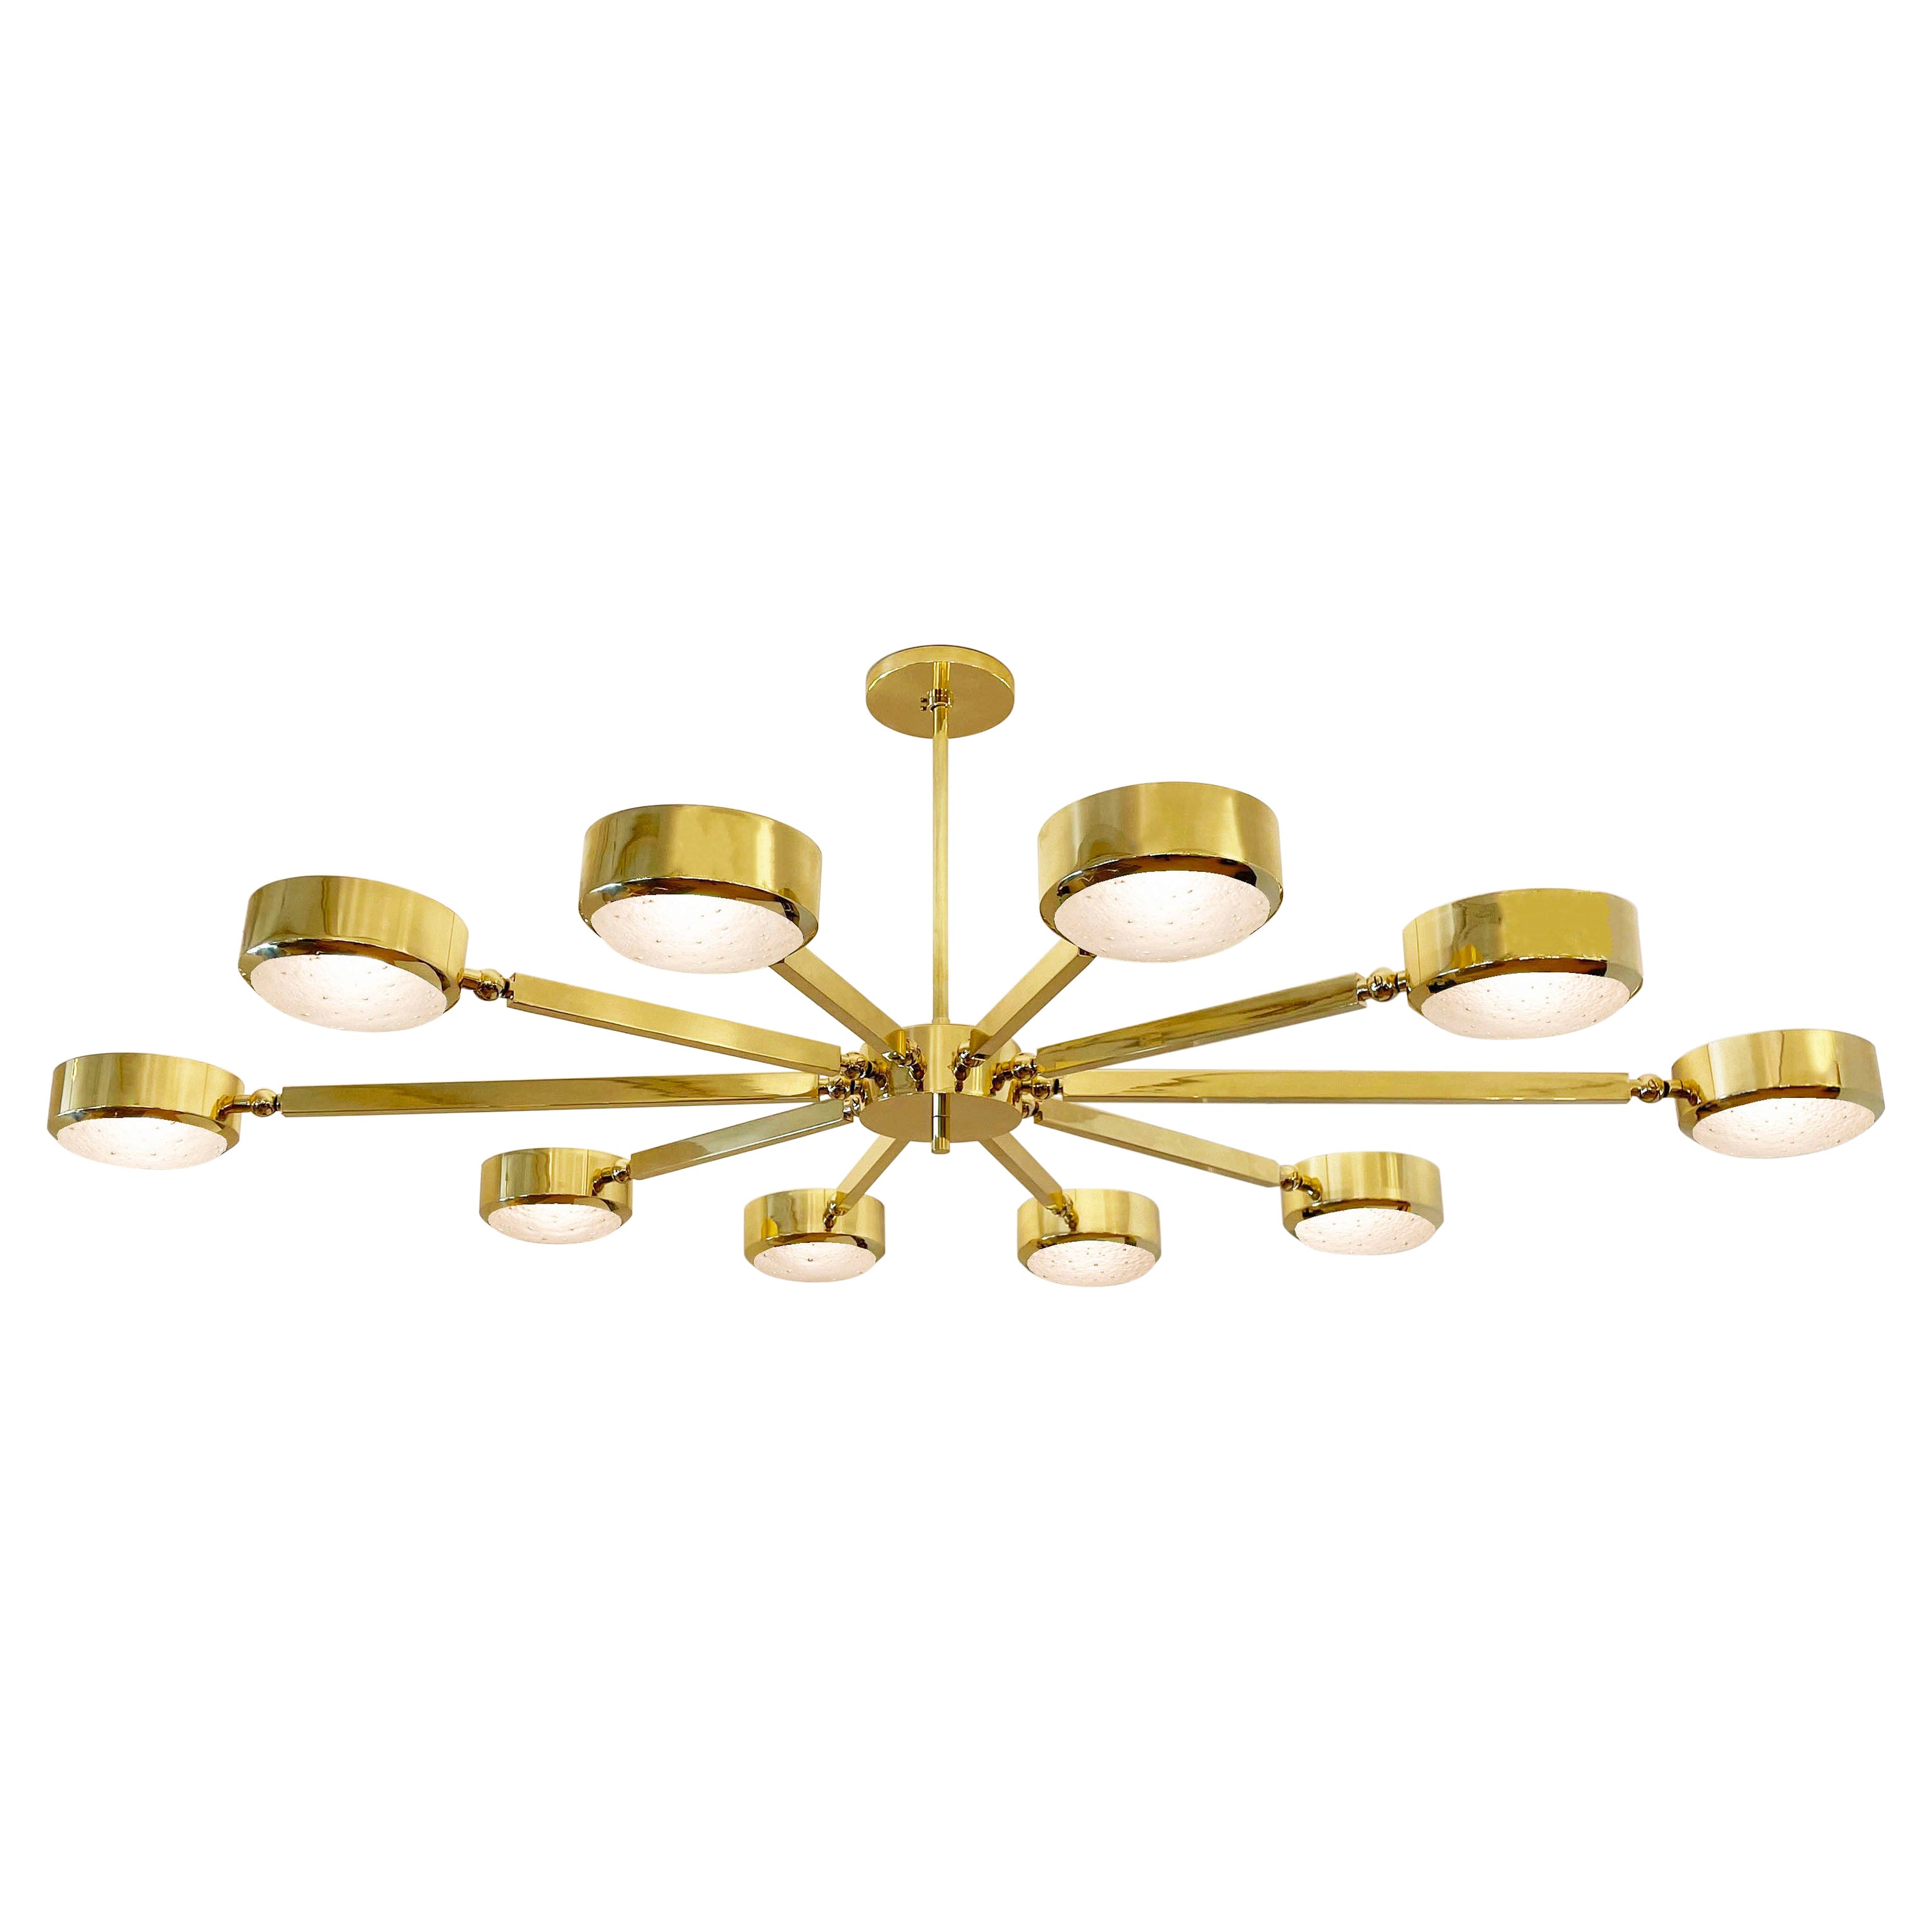 Oculus Oval Ceiling Light by Gaspare Asaro- Polished Brass with Murano Glass For Sale